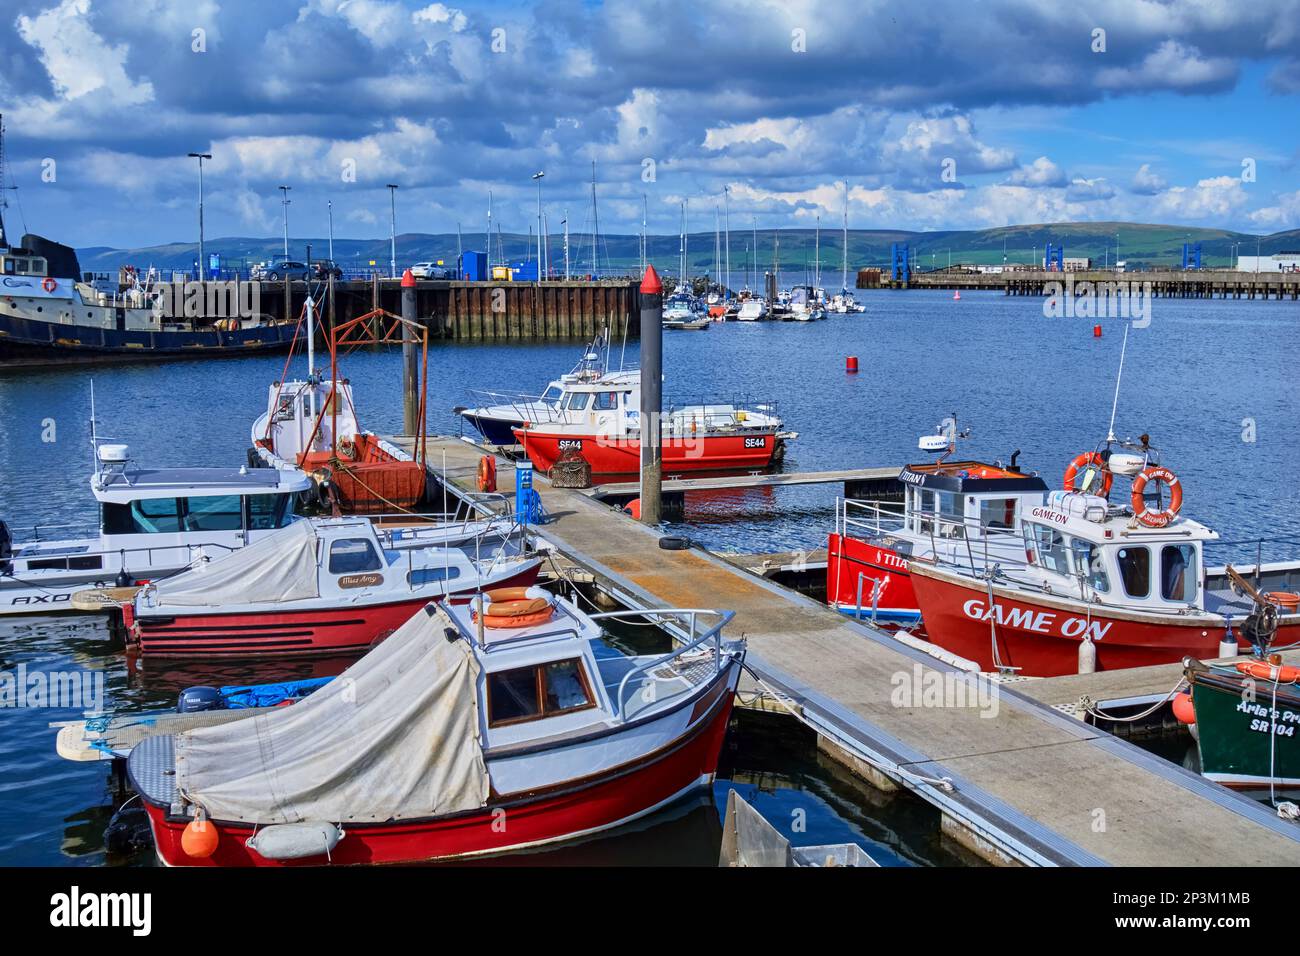 Small boats in Stranraer harbour, Dumfries and Galloway, Scotland. Stock Photo